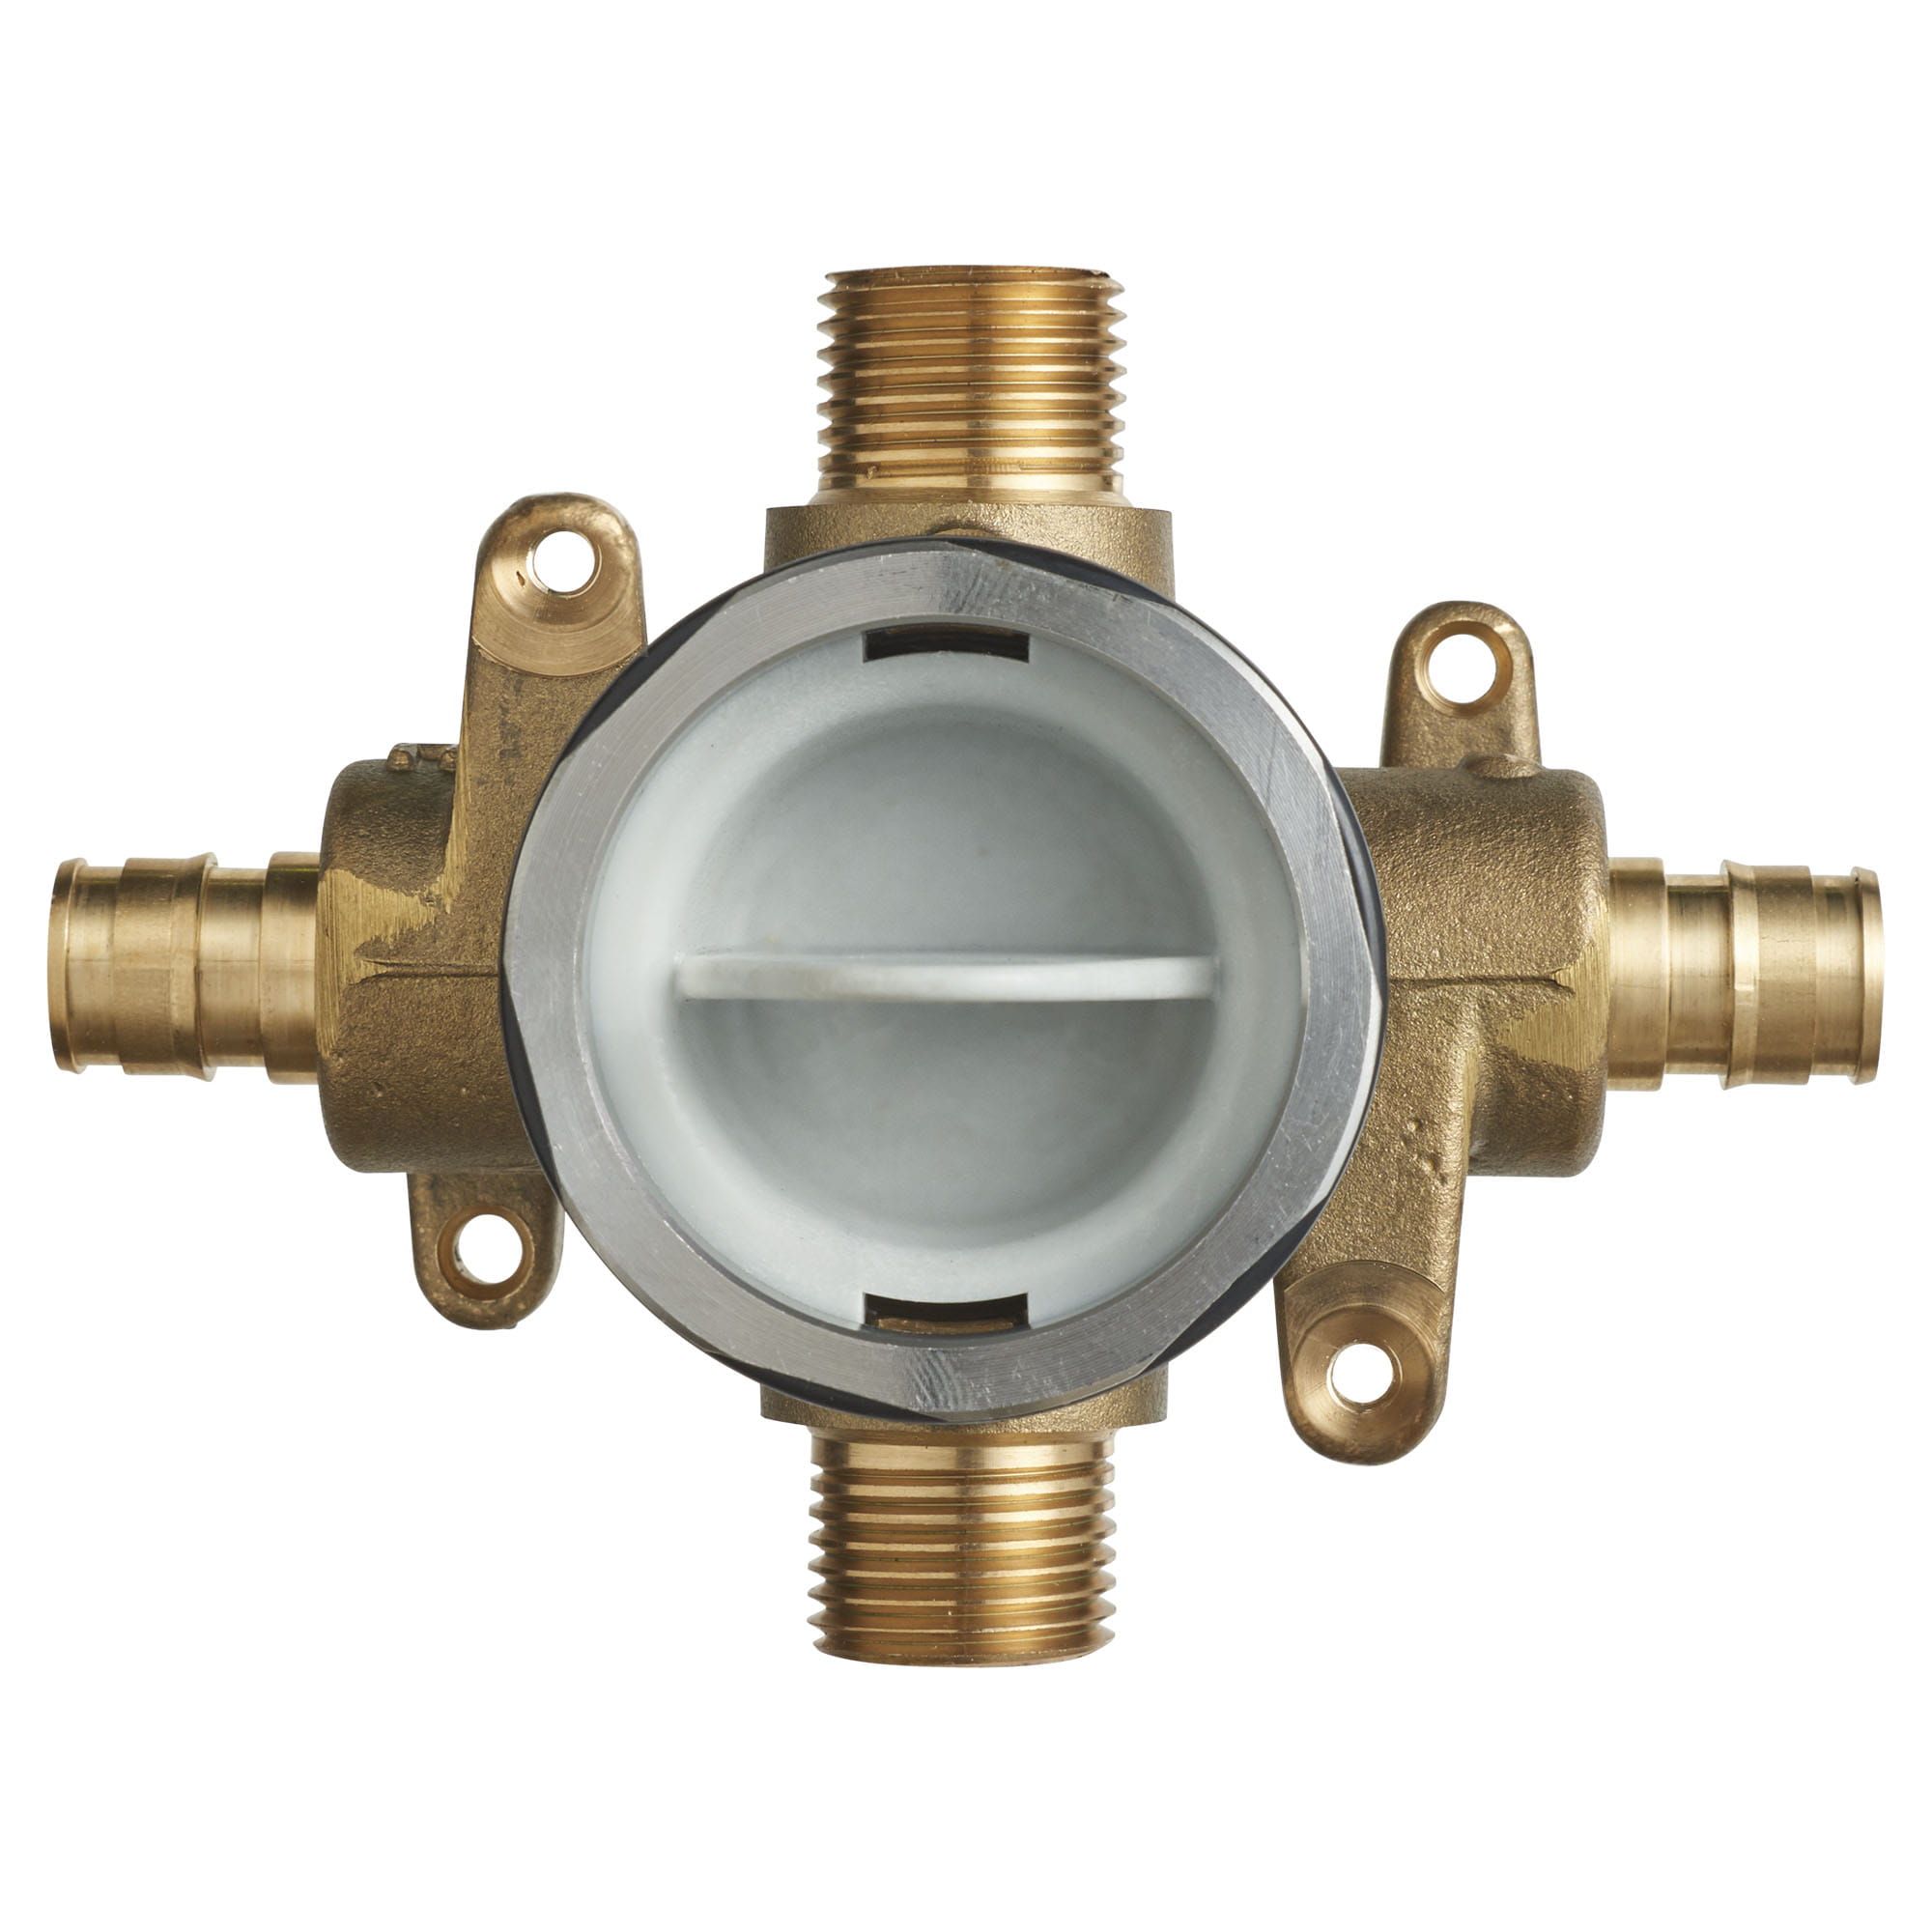 Flash® Shower Rough-In Valve With PEX Inlets/Universal Outlets for Cold Expansion System